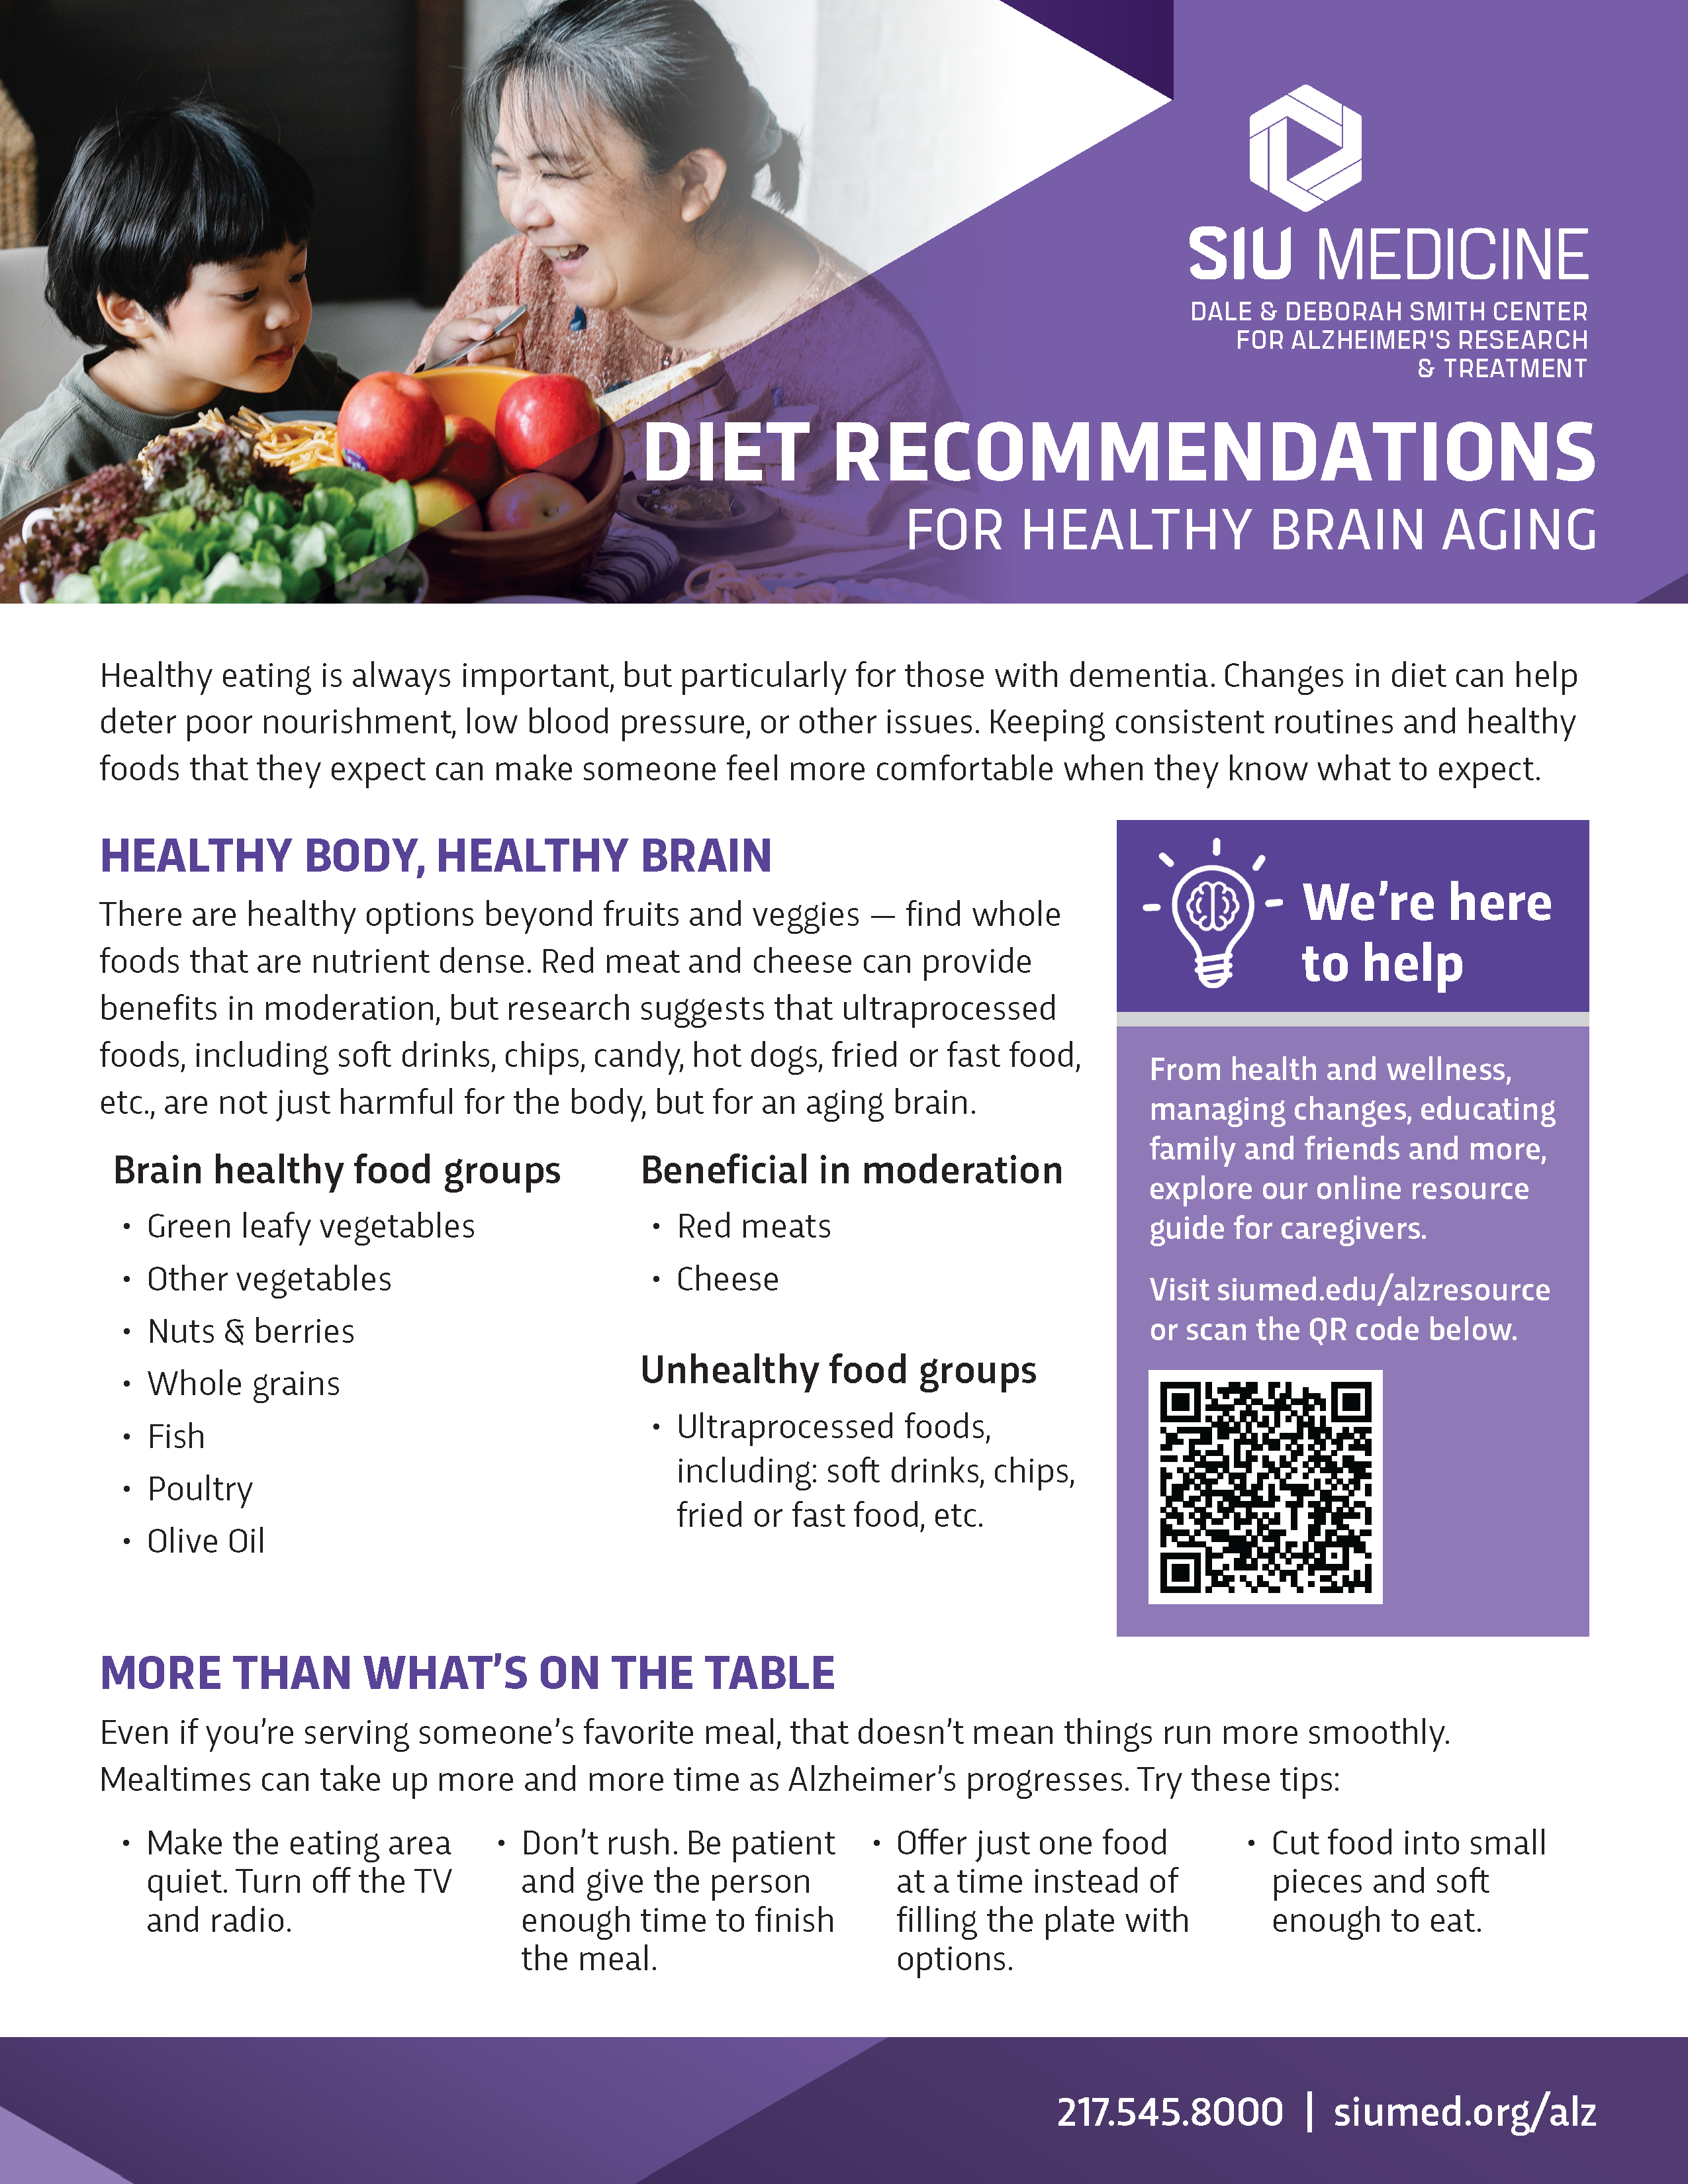 Nutrition fact sheet for those with Alzheimer's